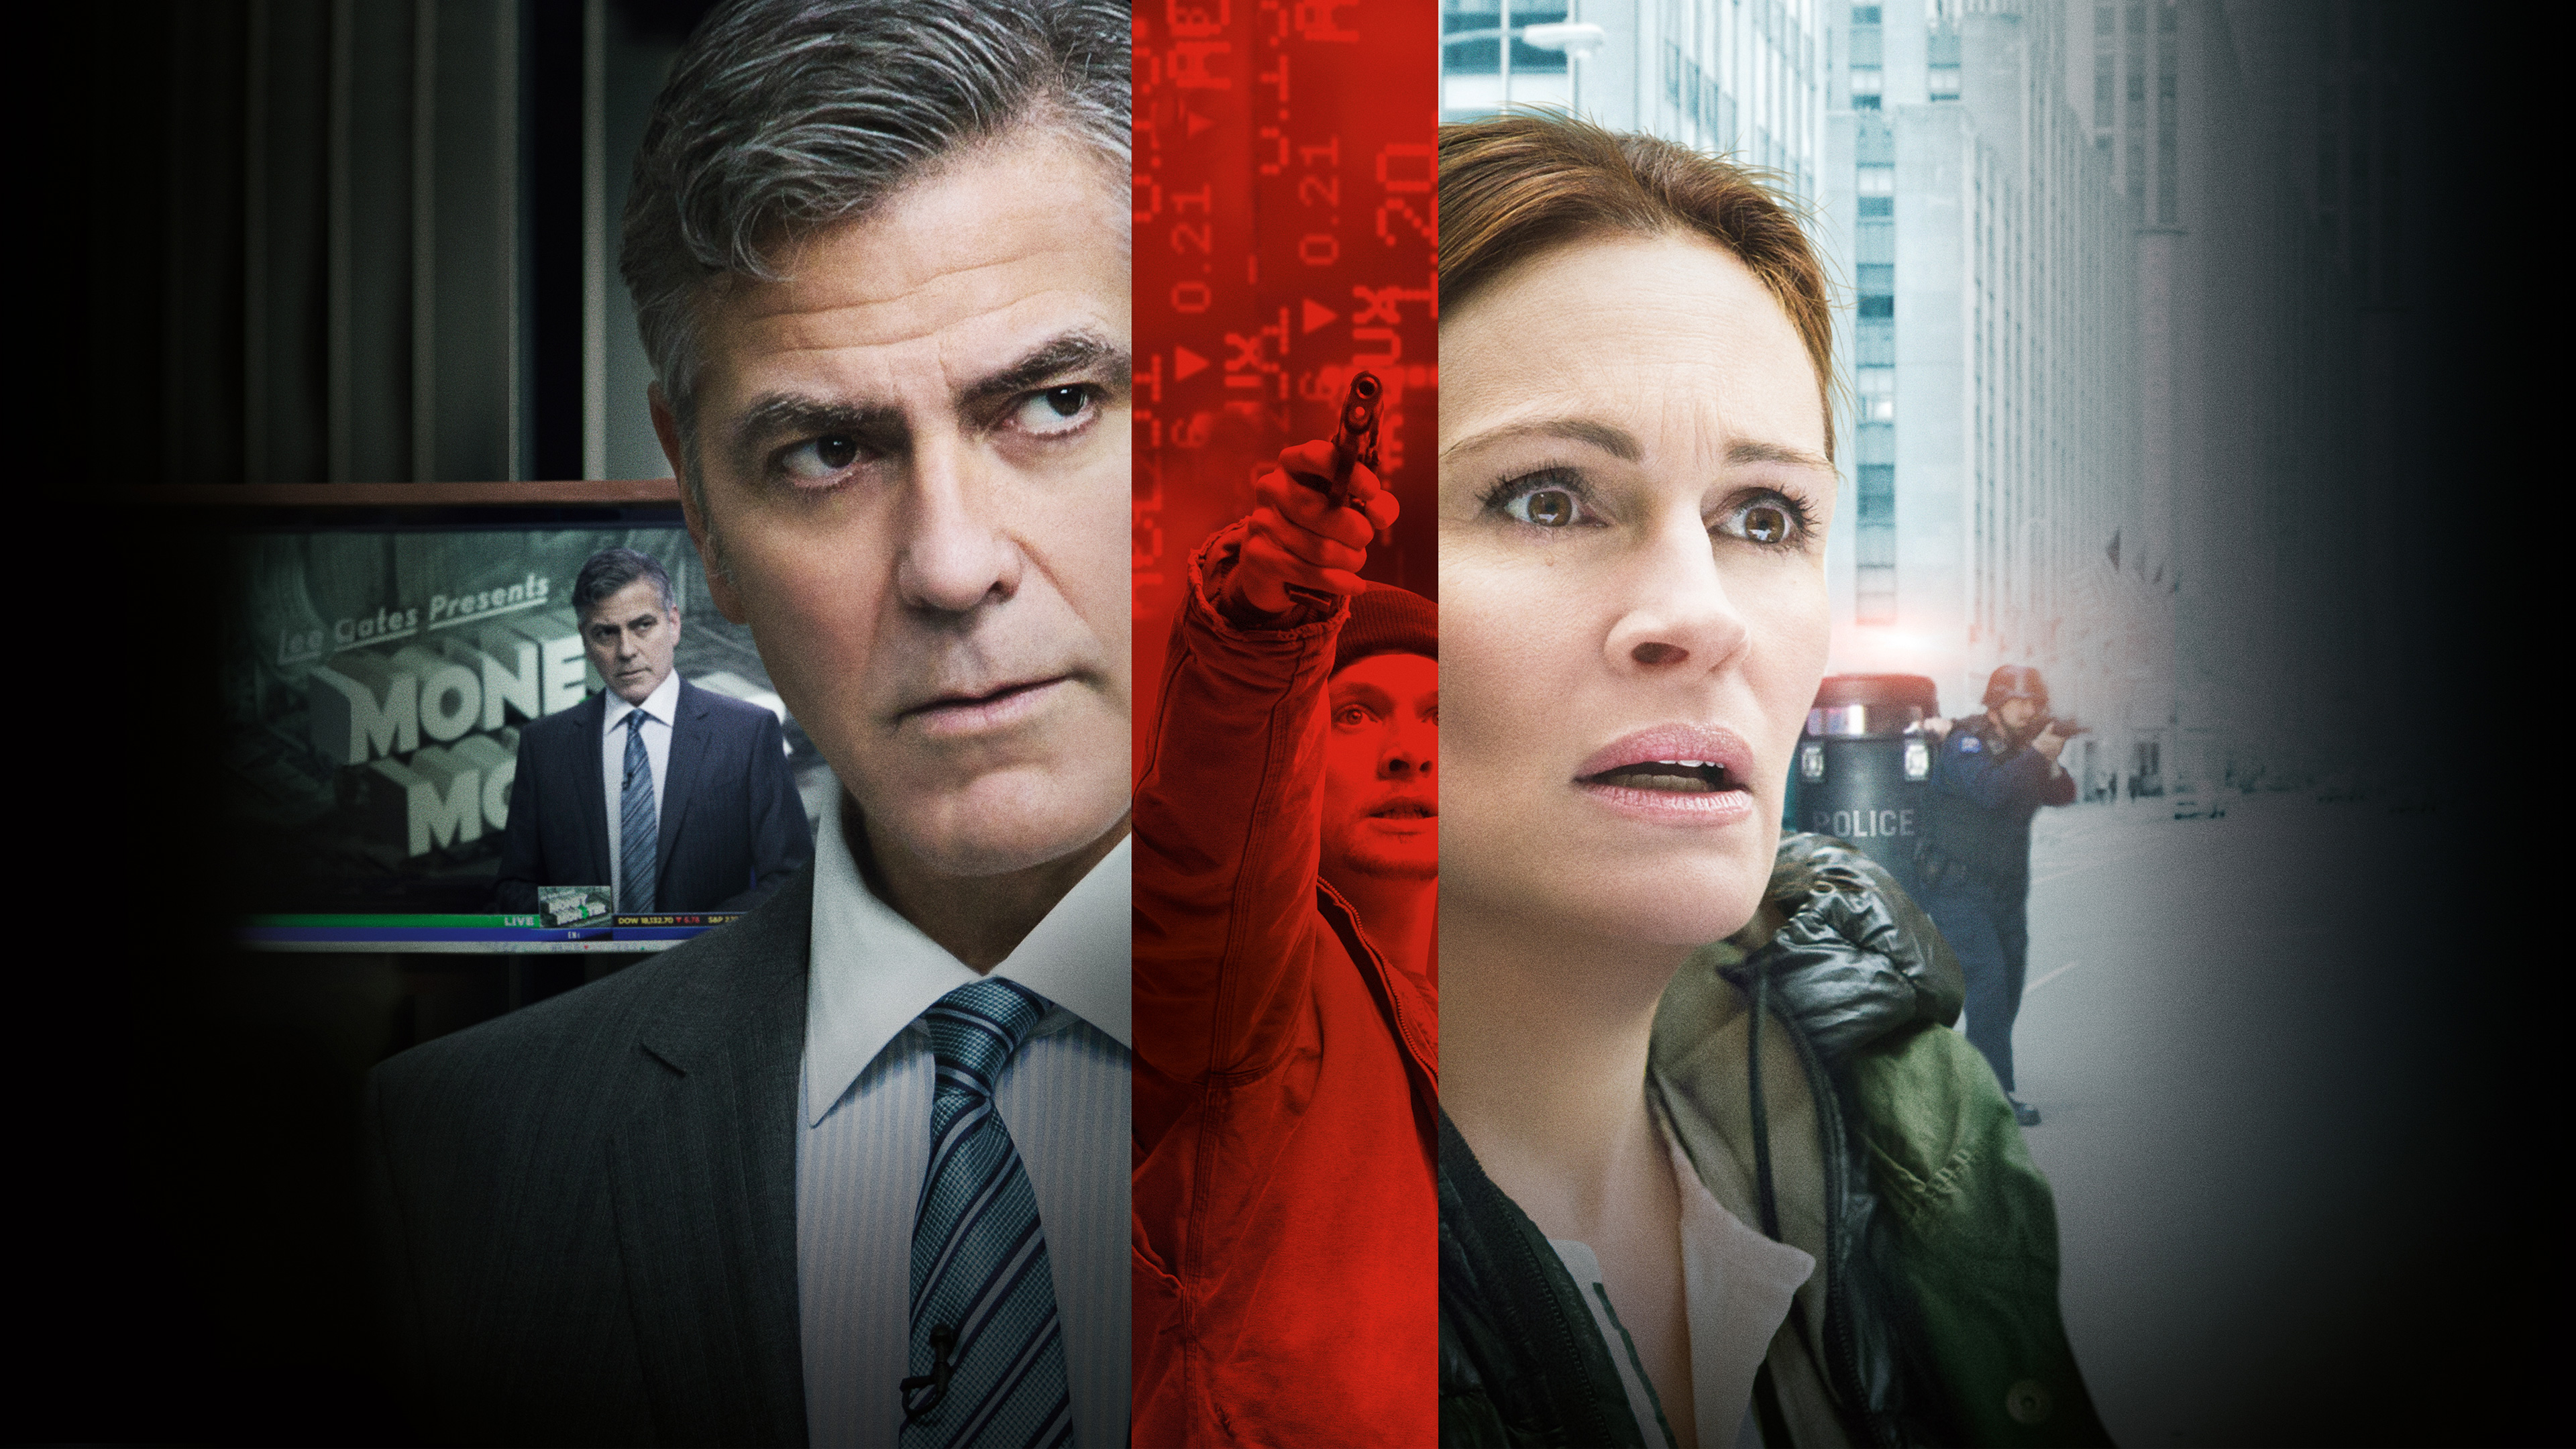 Nice Images Collection: Money Monster Desktop Wallpapers